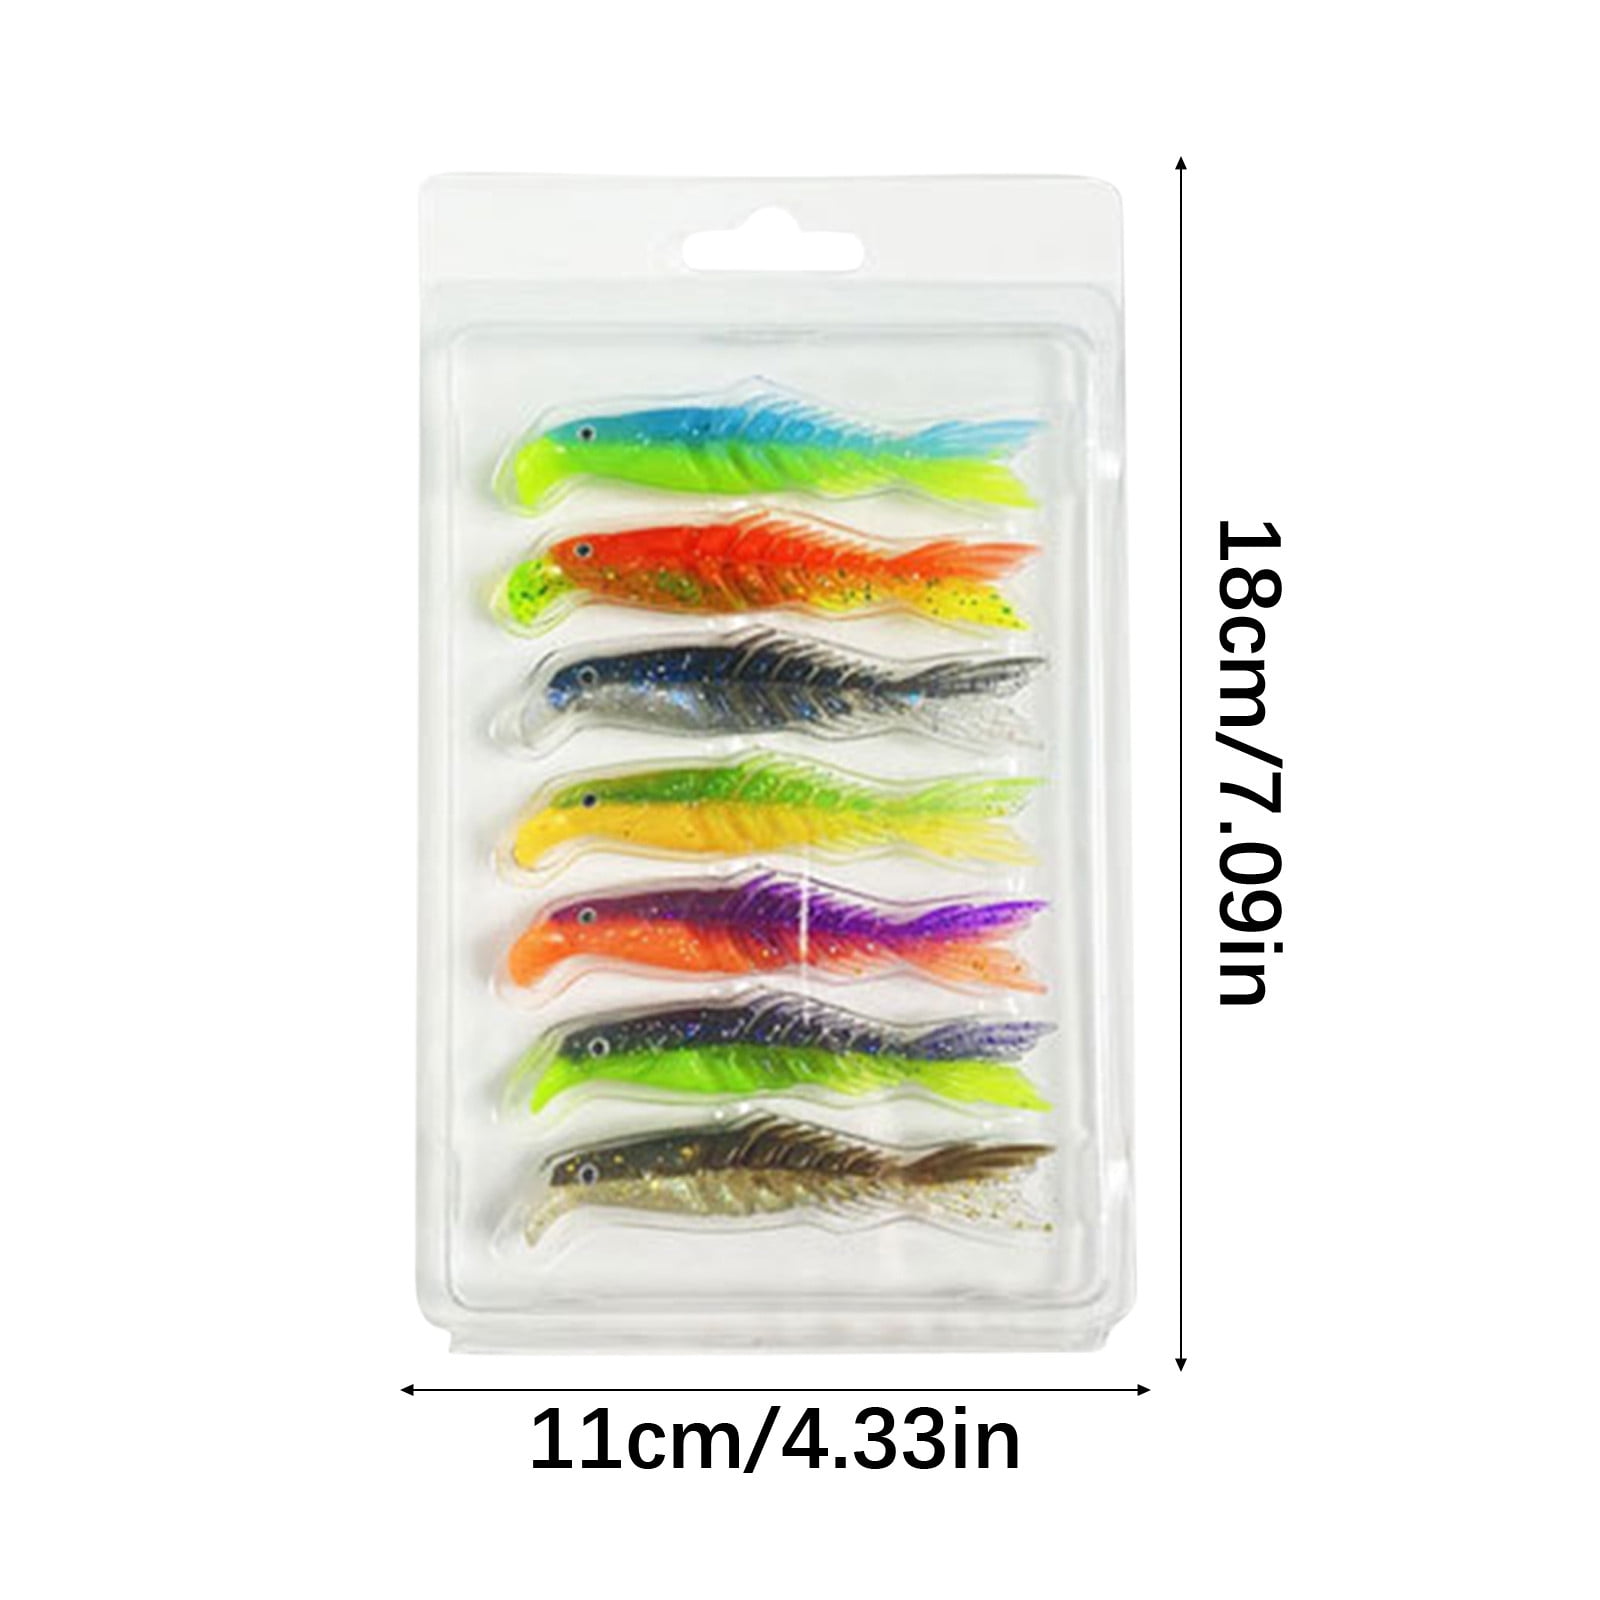 Dr.Fish Paddle Tail Swimbaits, Soft Lures for Bass Fishing, Soft Baits Swim  Shad Bait Minnow Lures Drop Shot Fishing Lures Fluke Baits, 2-3/4 Inches  Blue, Soft Plastic Lures -  Canada